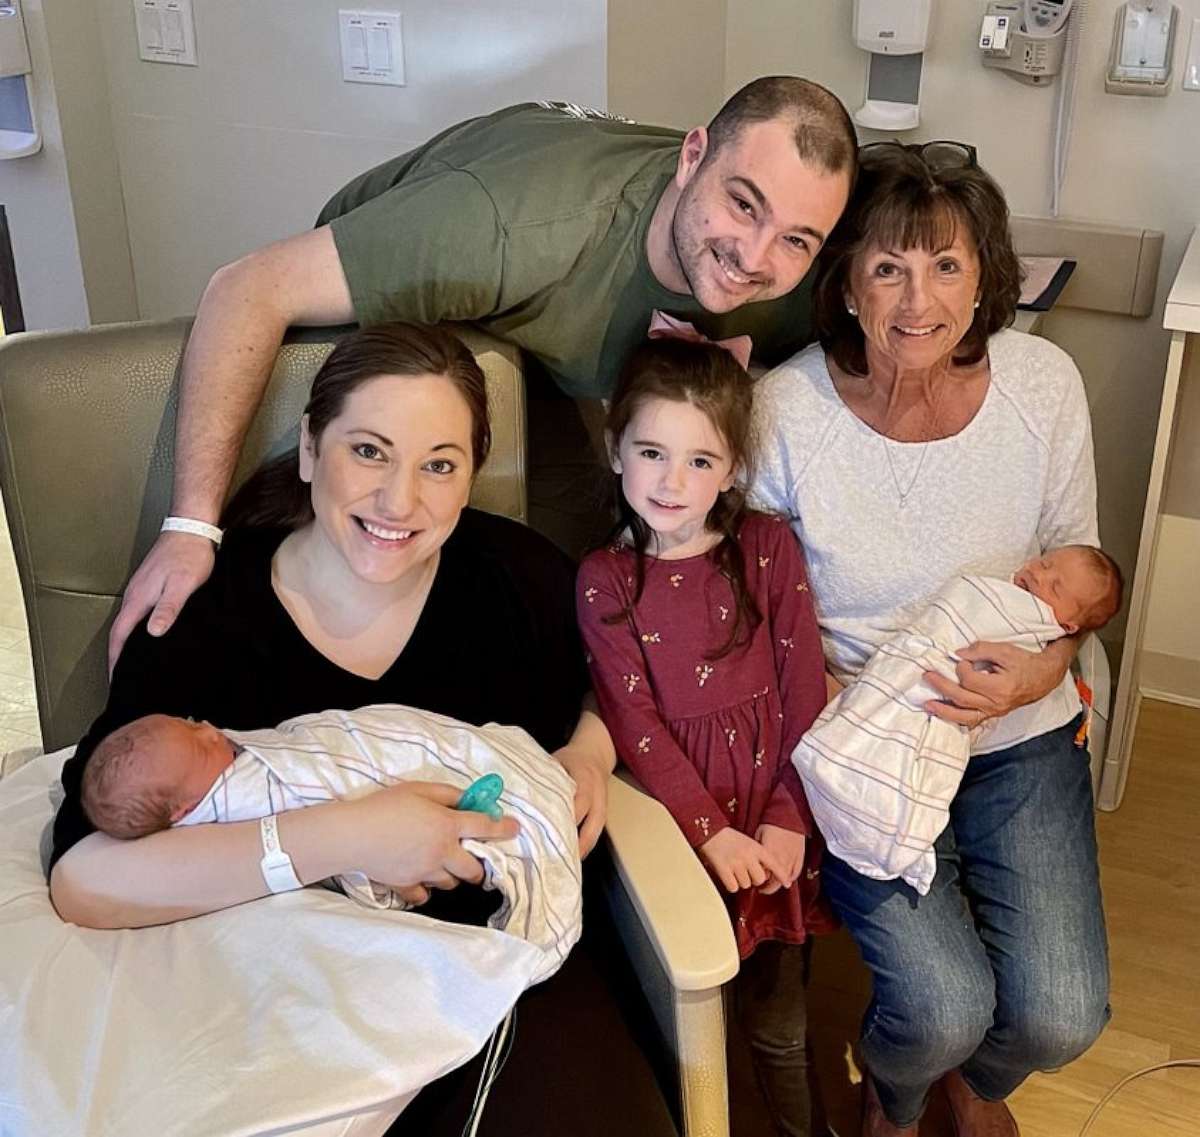 PHOTO: Ariana Sutton, bottom left, is pictured with family members shortly after she gave birth to twins.